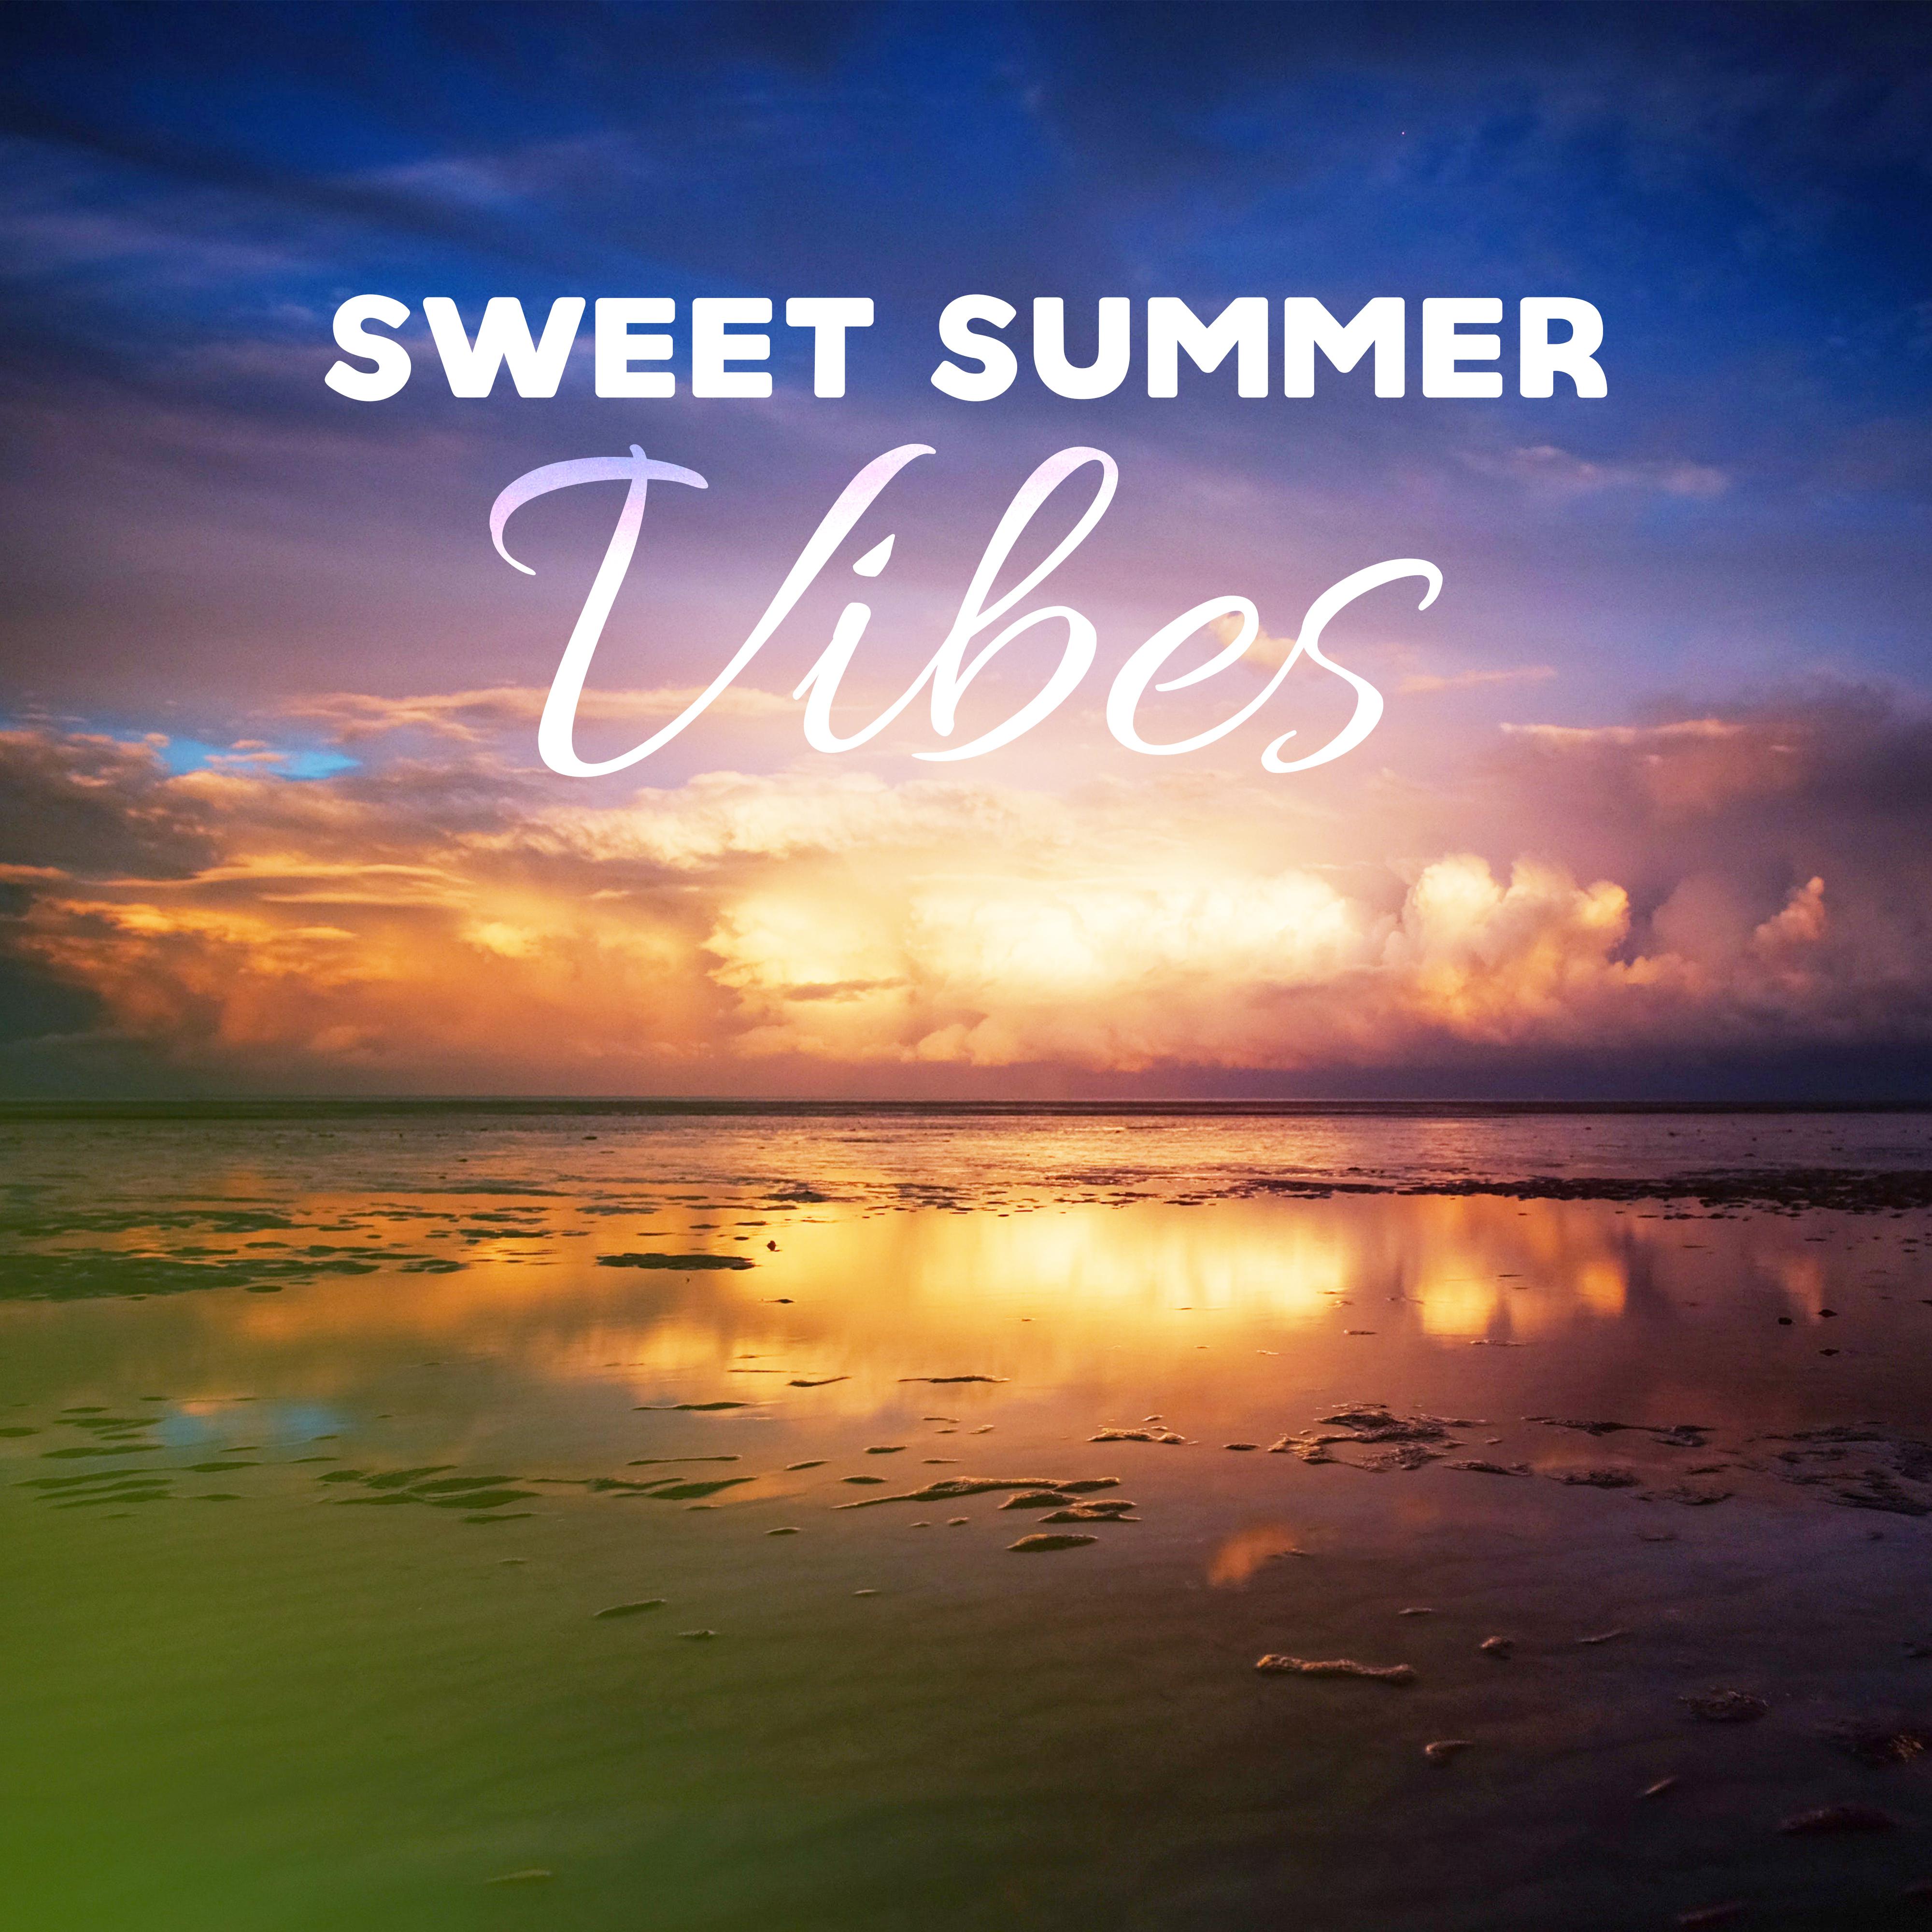 Sweet Summer Vibes  Chill Out Music, Summer Touch, Holiday Memories, Relax